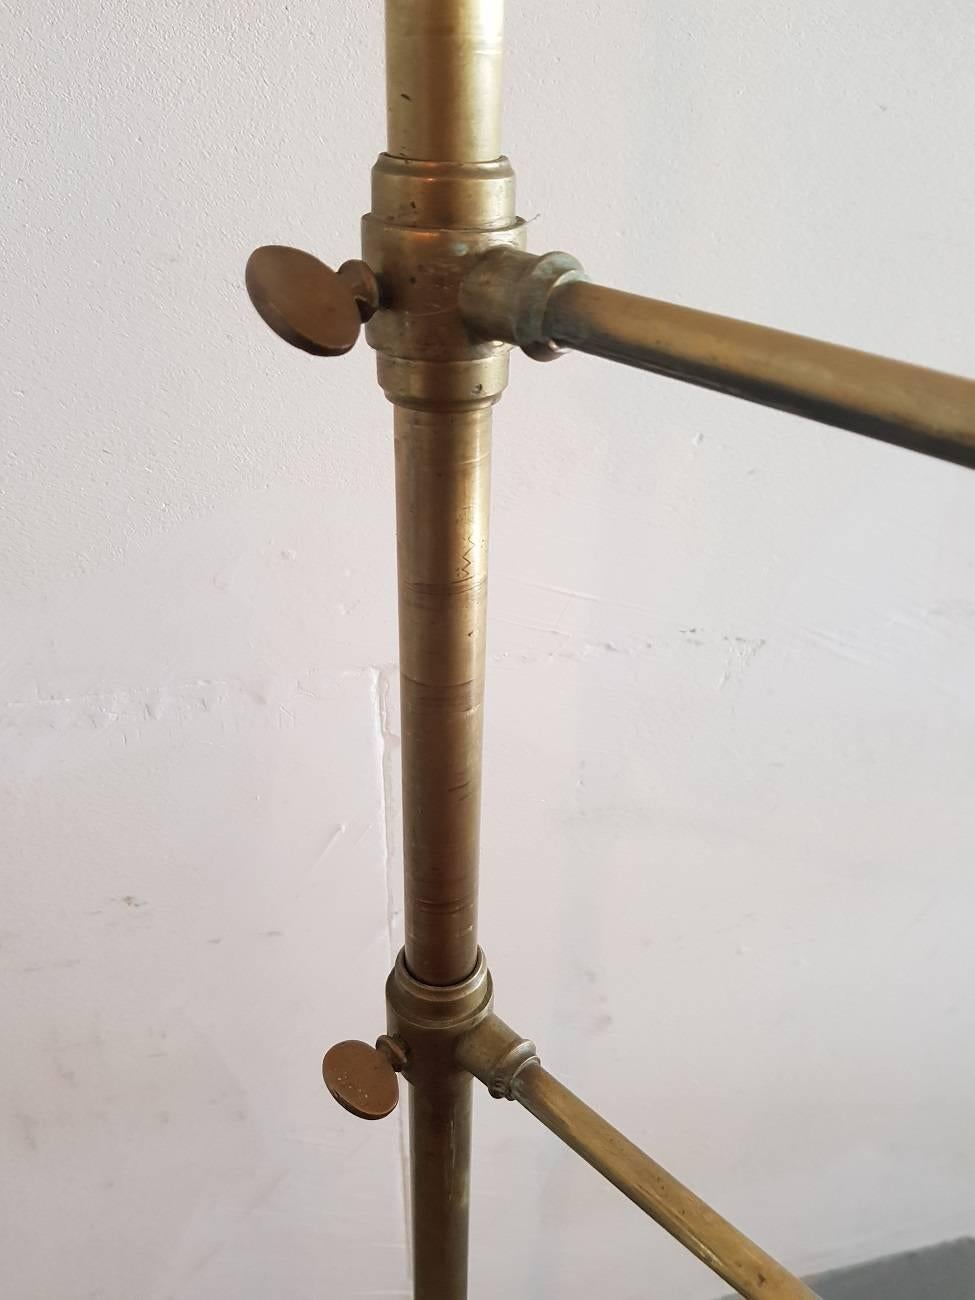 20th Century Old French Brass Towel Rack or Stand with a Wooden Base, Early 1900s